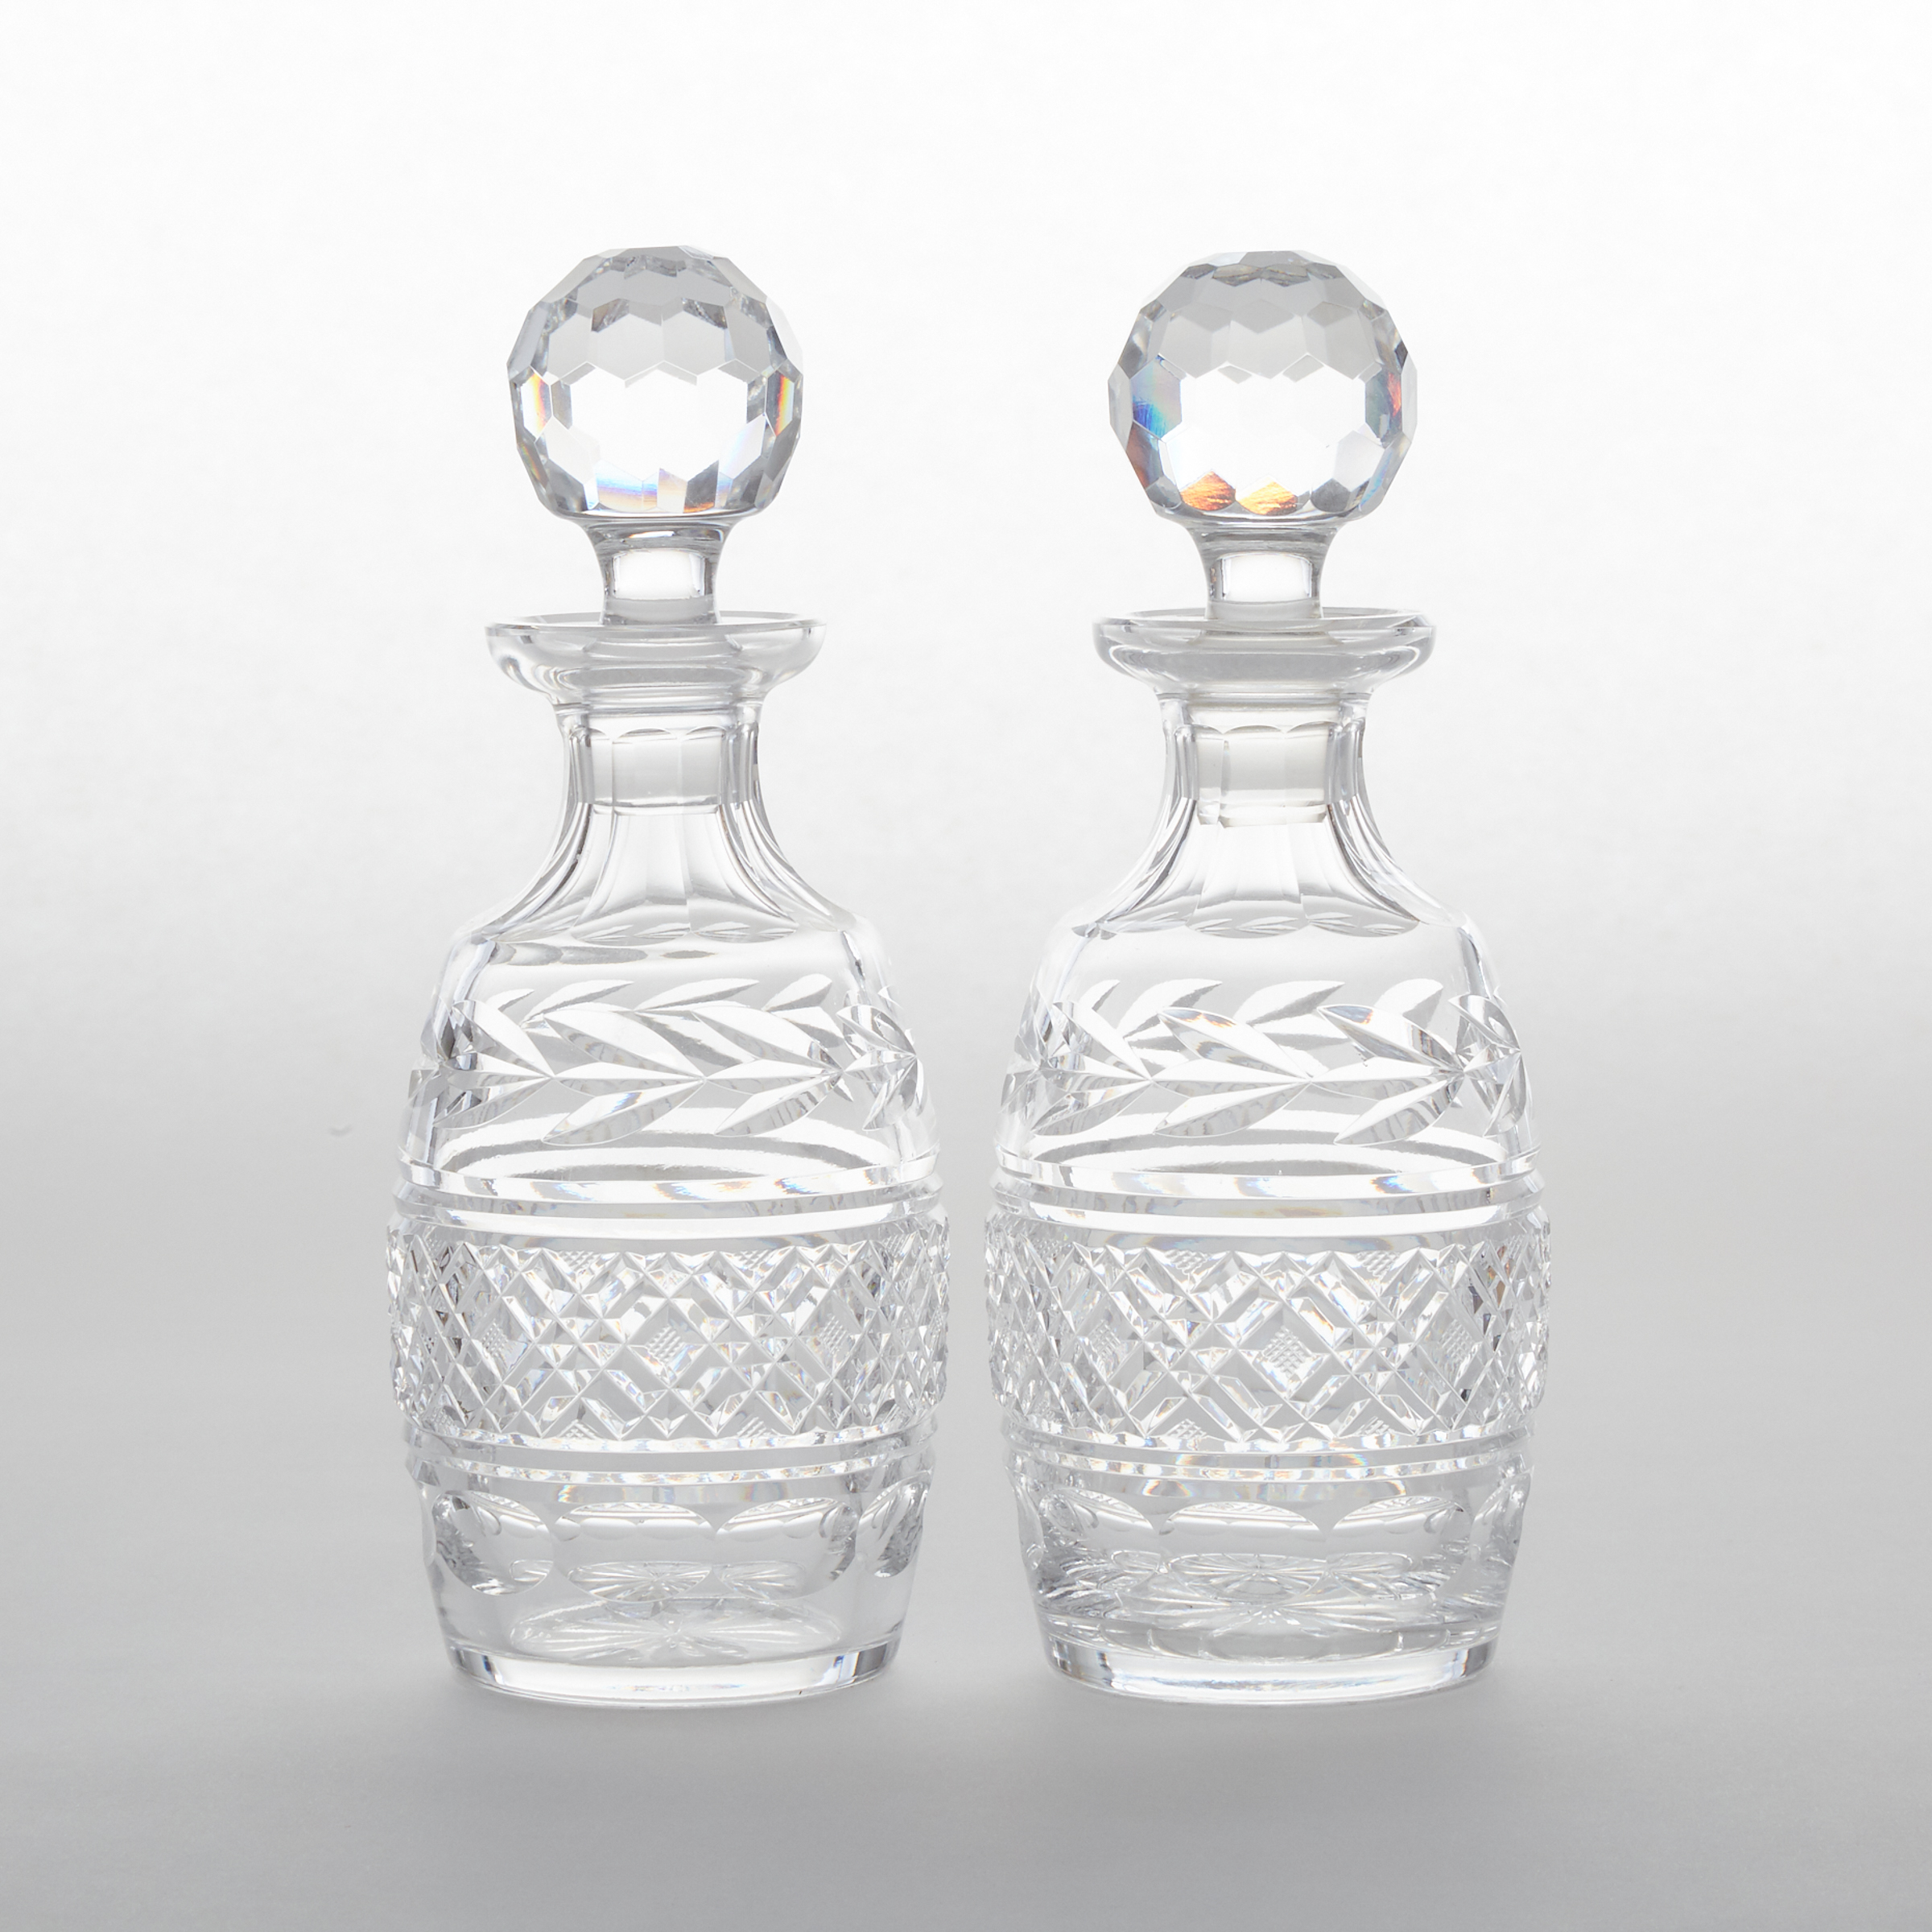 Pair of Waterford Cut Glass Decanters, 20th century